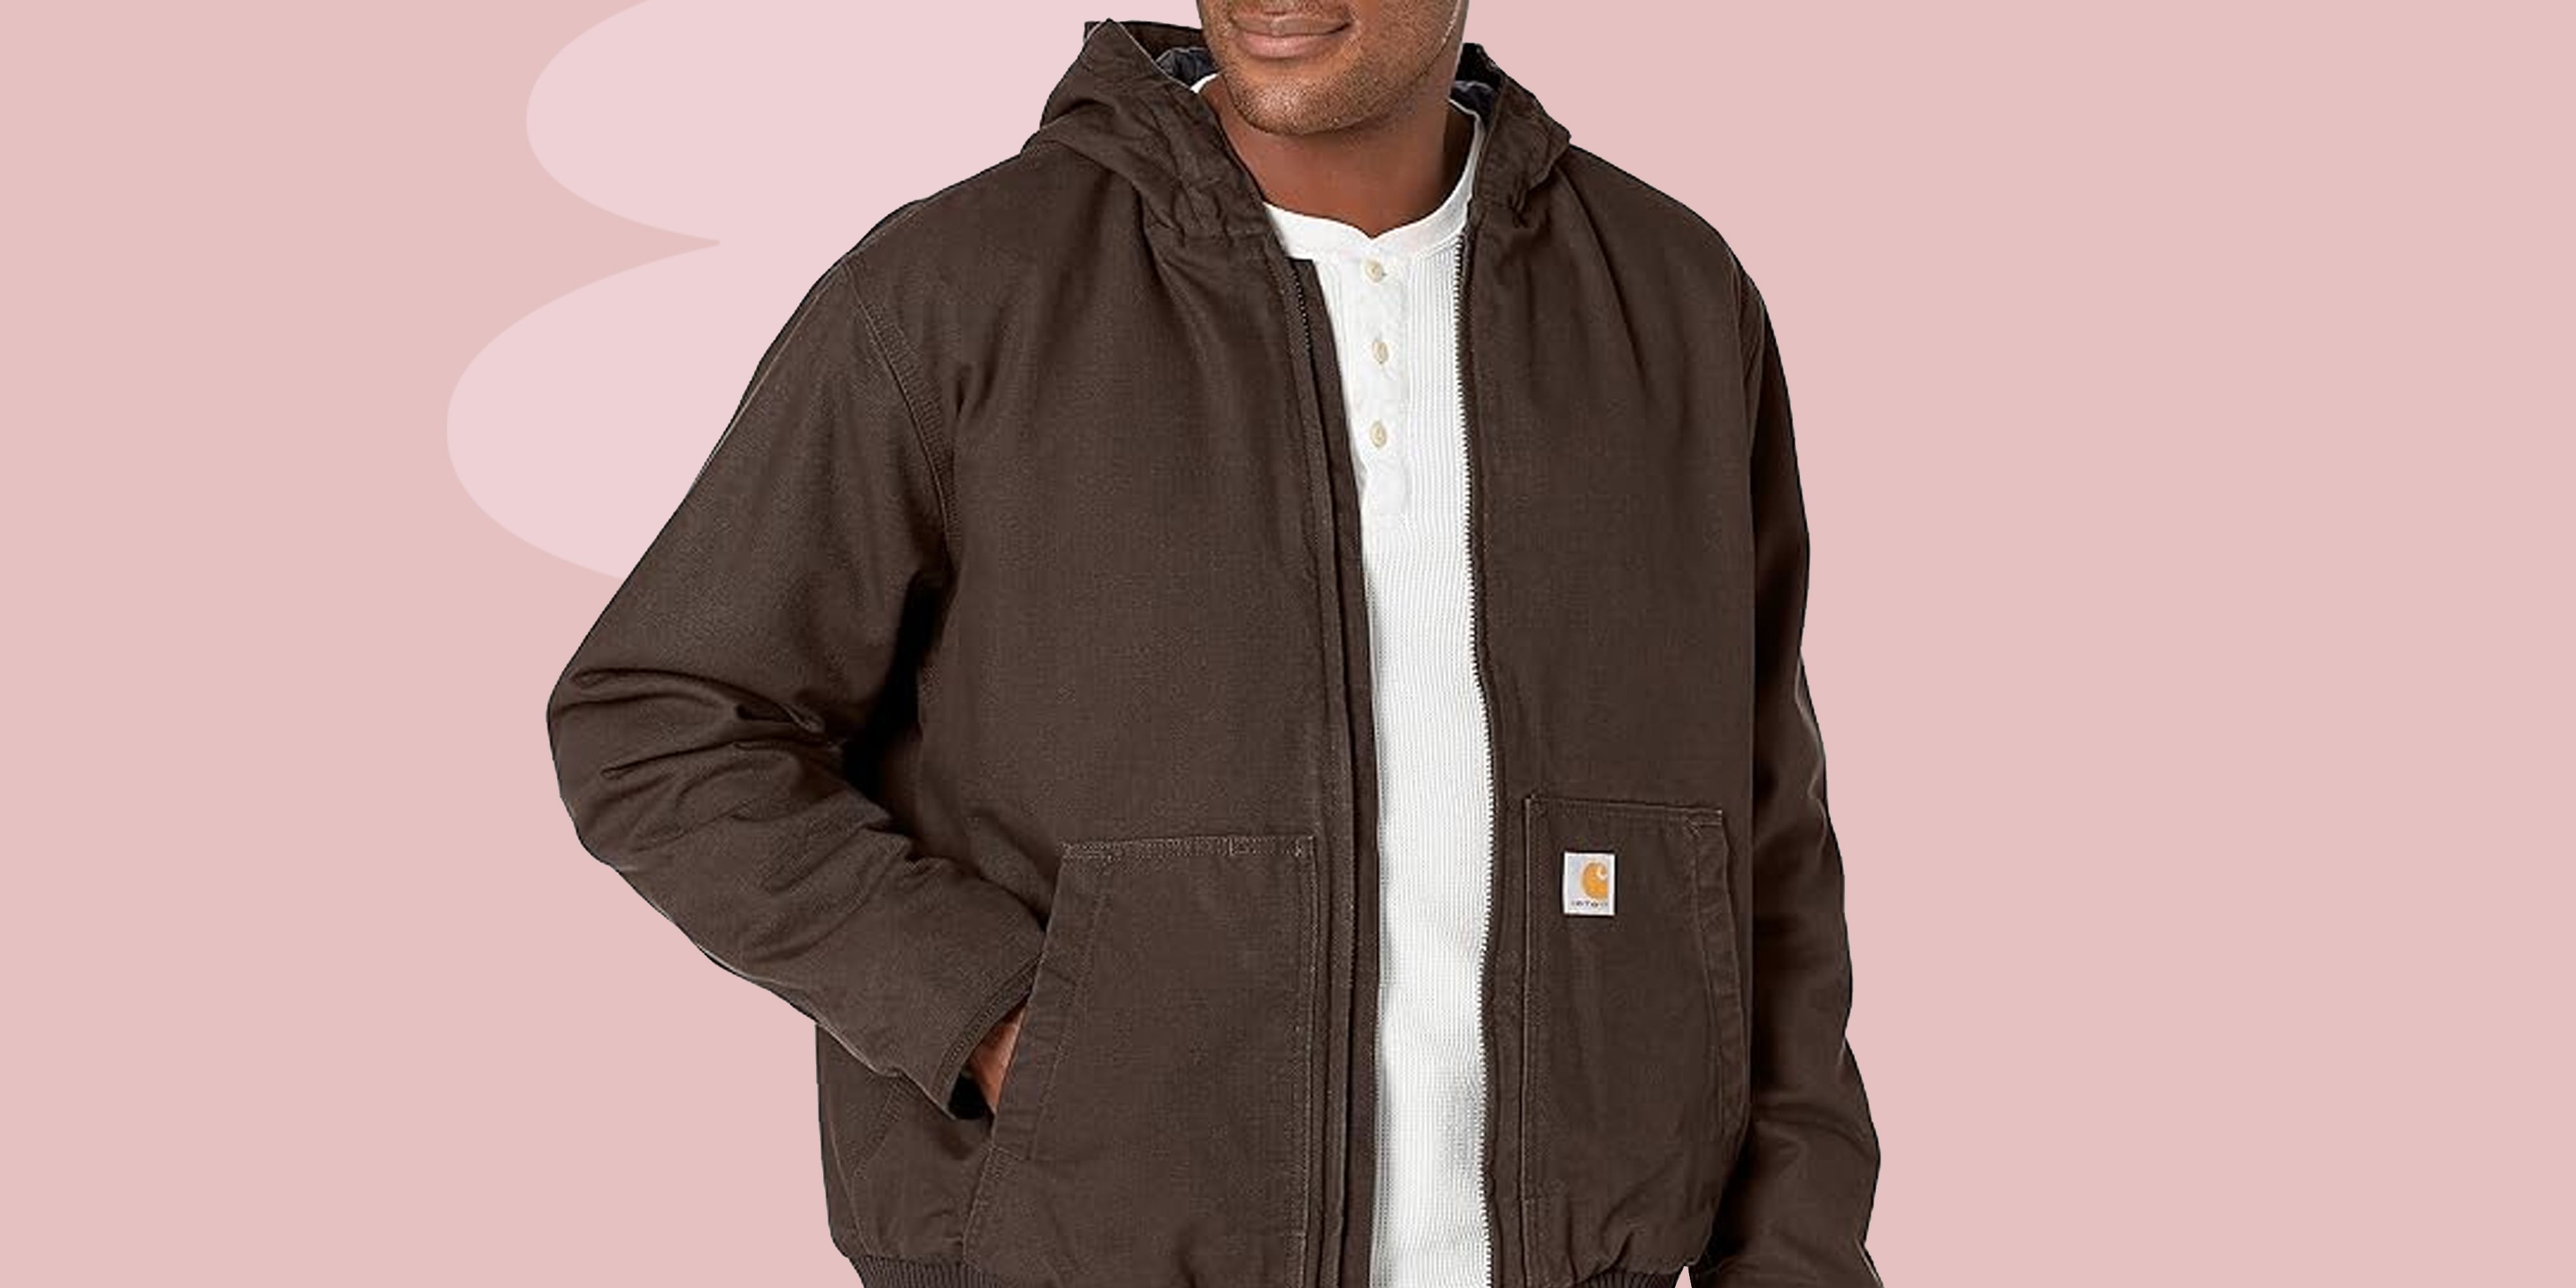 How to keep warm in winter with Carhartt - Professional Builder